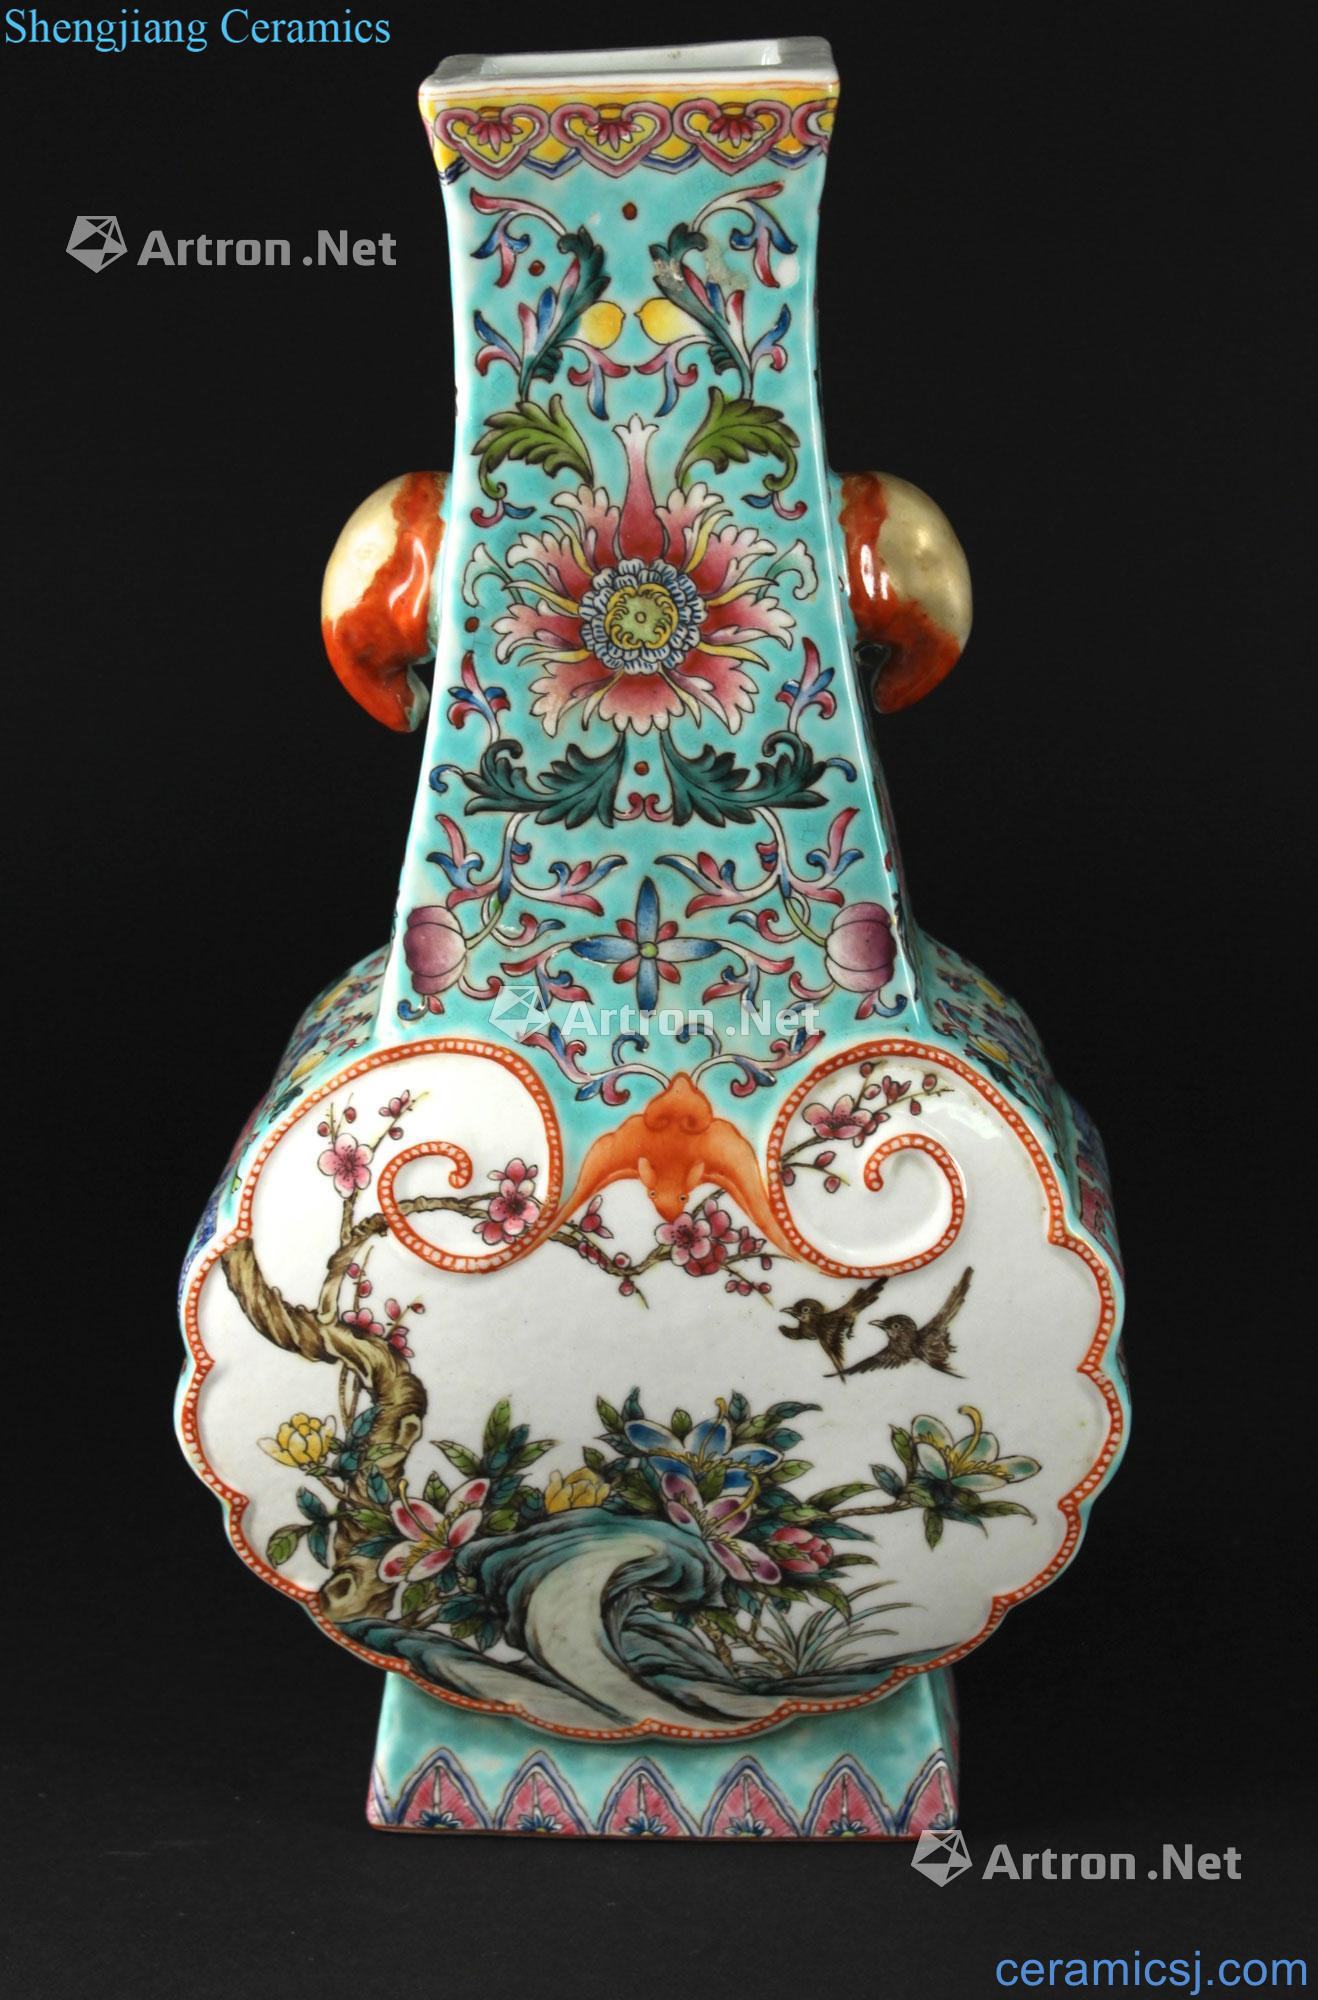 Imitation of the late qing dynasty emperor qianlong pastel hoard of green treasure phase pattern on both sides with medallion of flowers and birds like ears tower square bottles